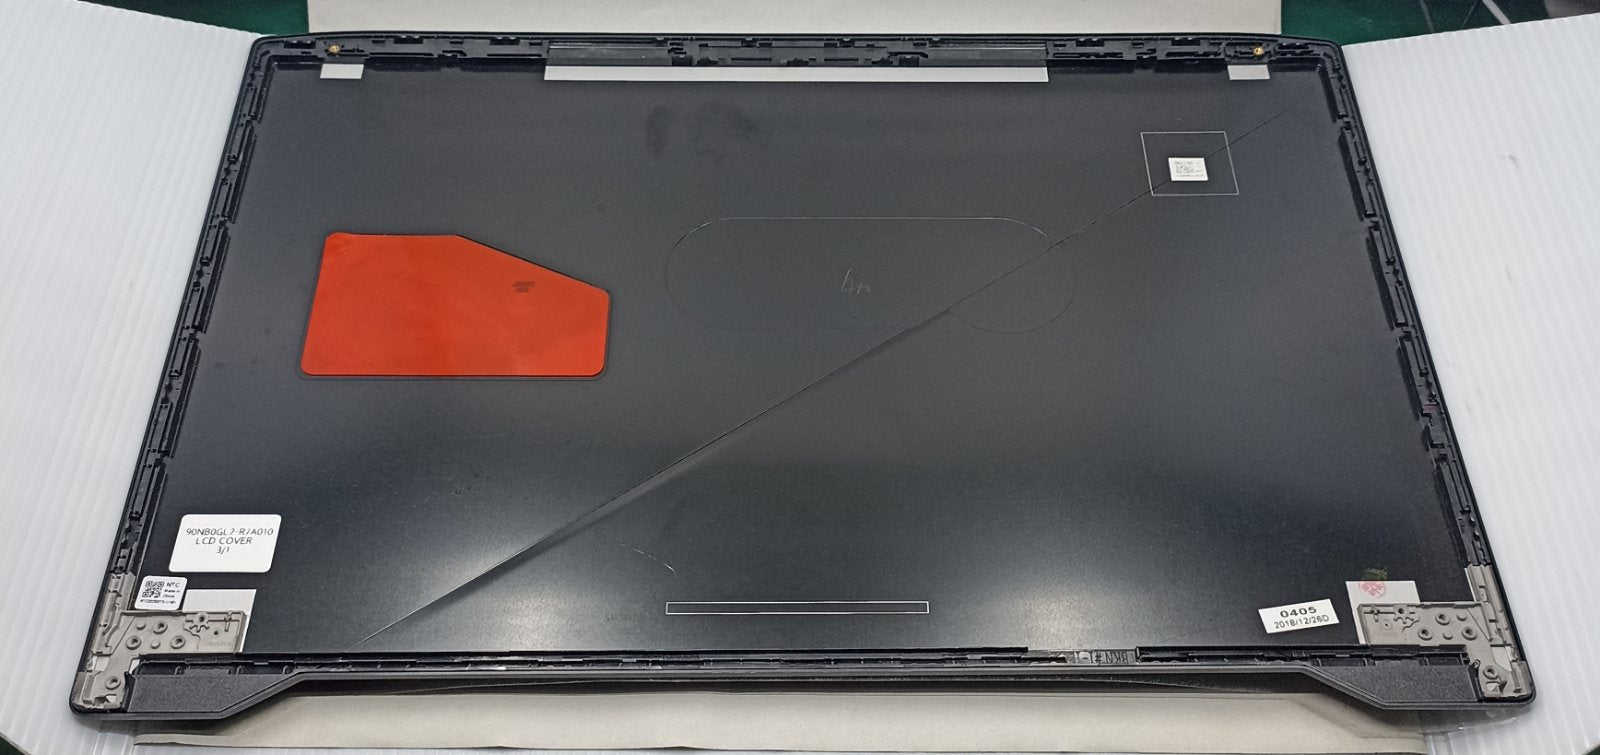 Replacement LCD Cover For Asus GL703VD WL